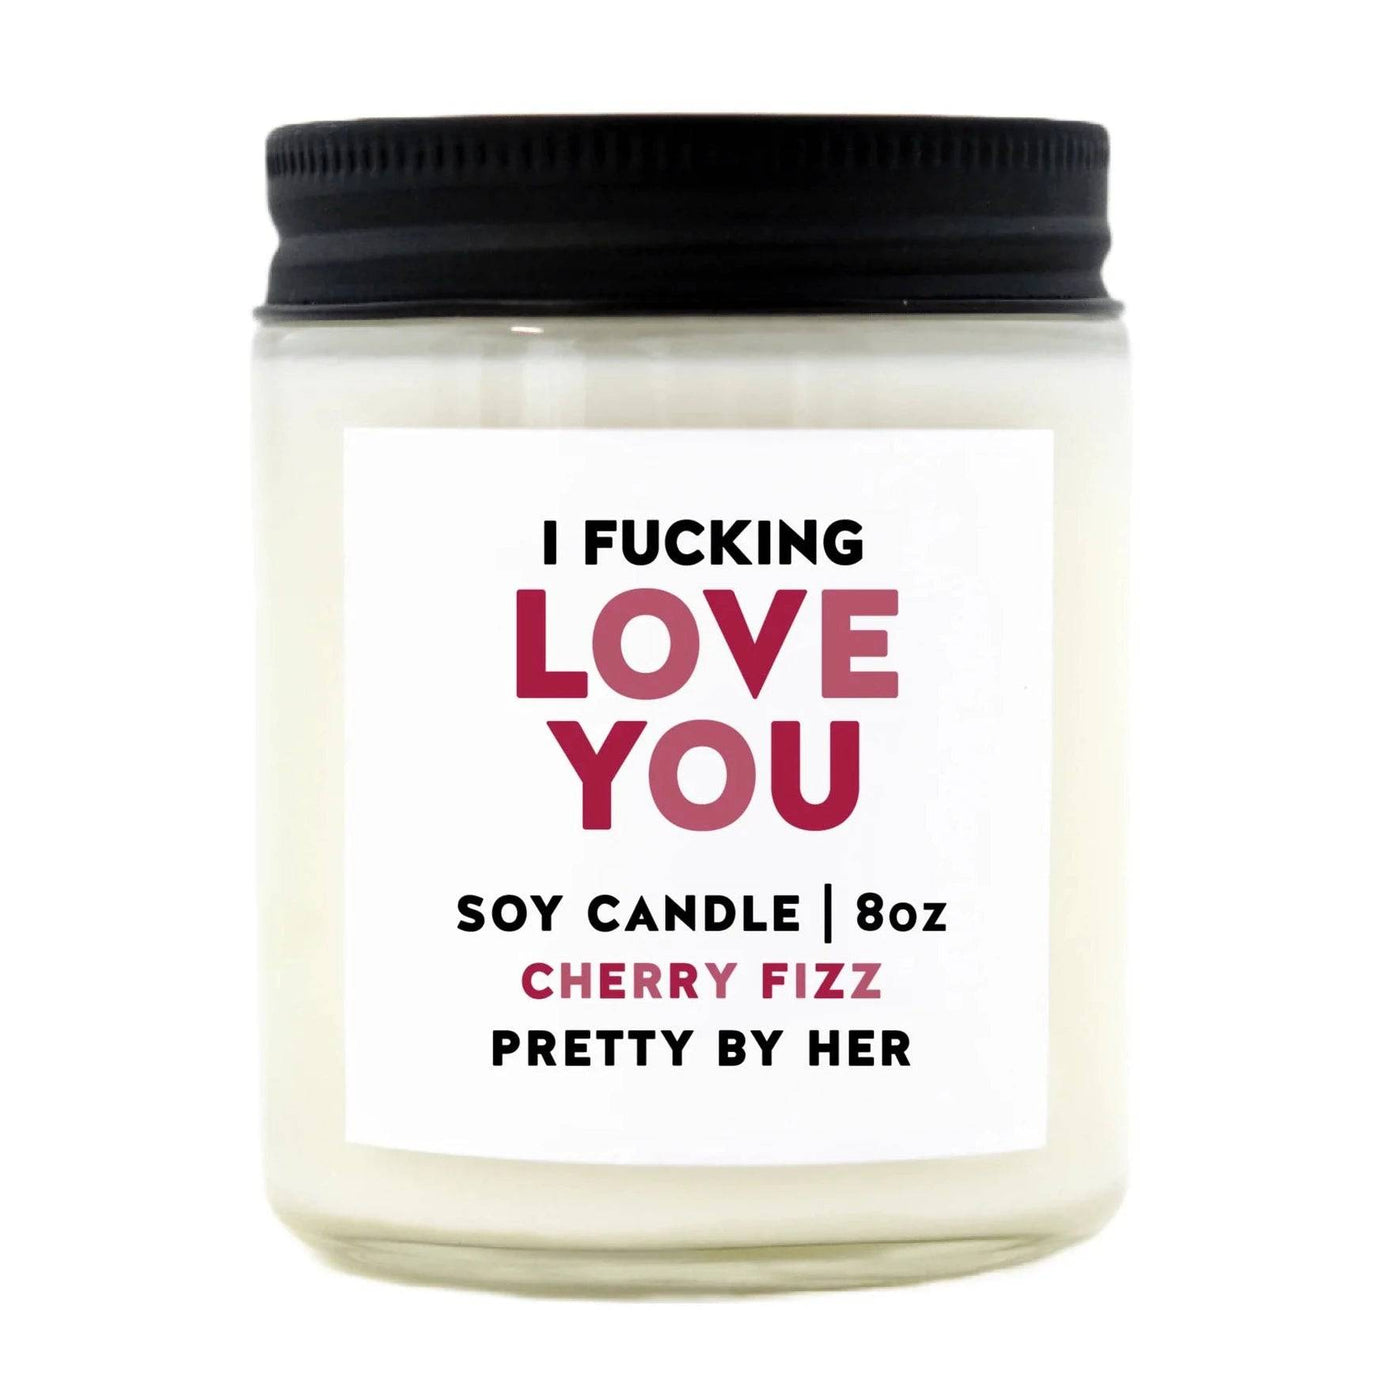 I Fucking Love You | Soy Candle - The Local Space